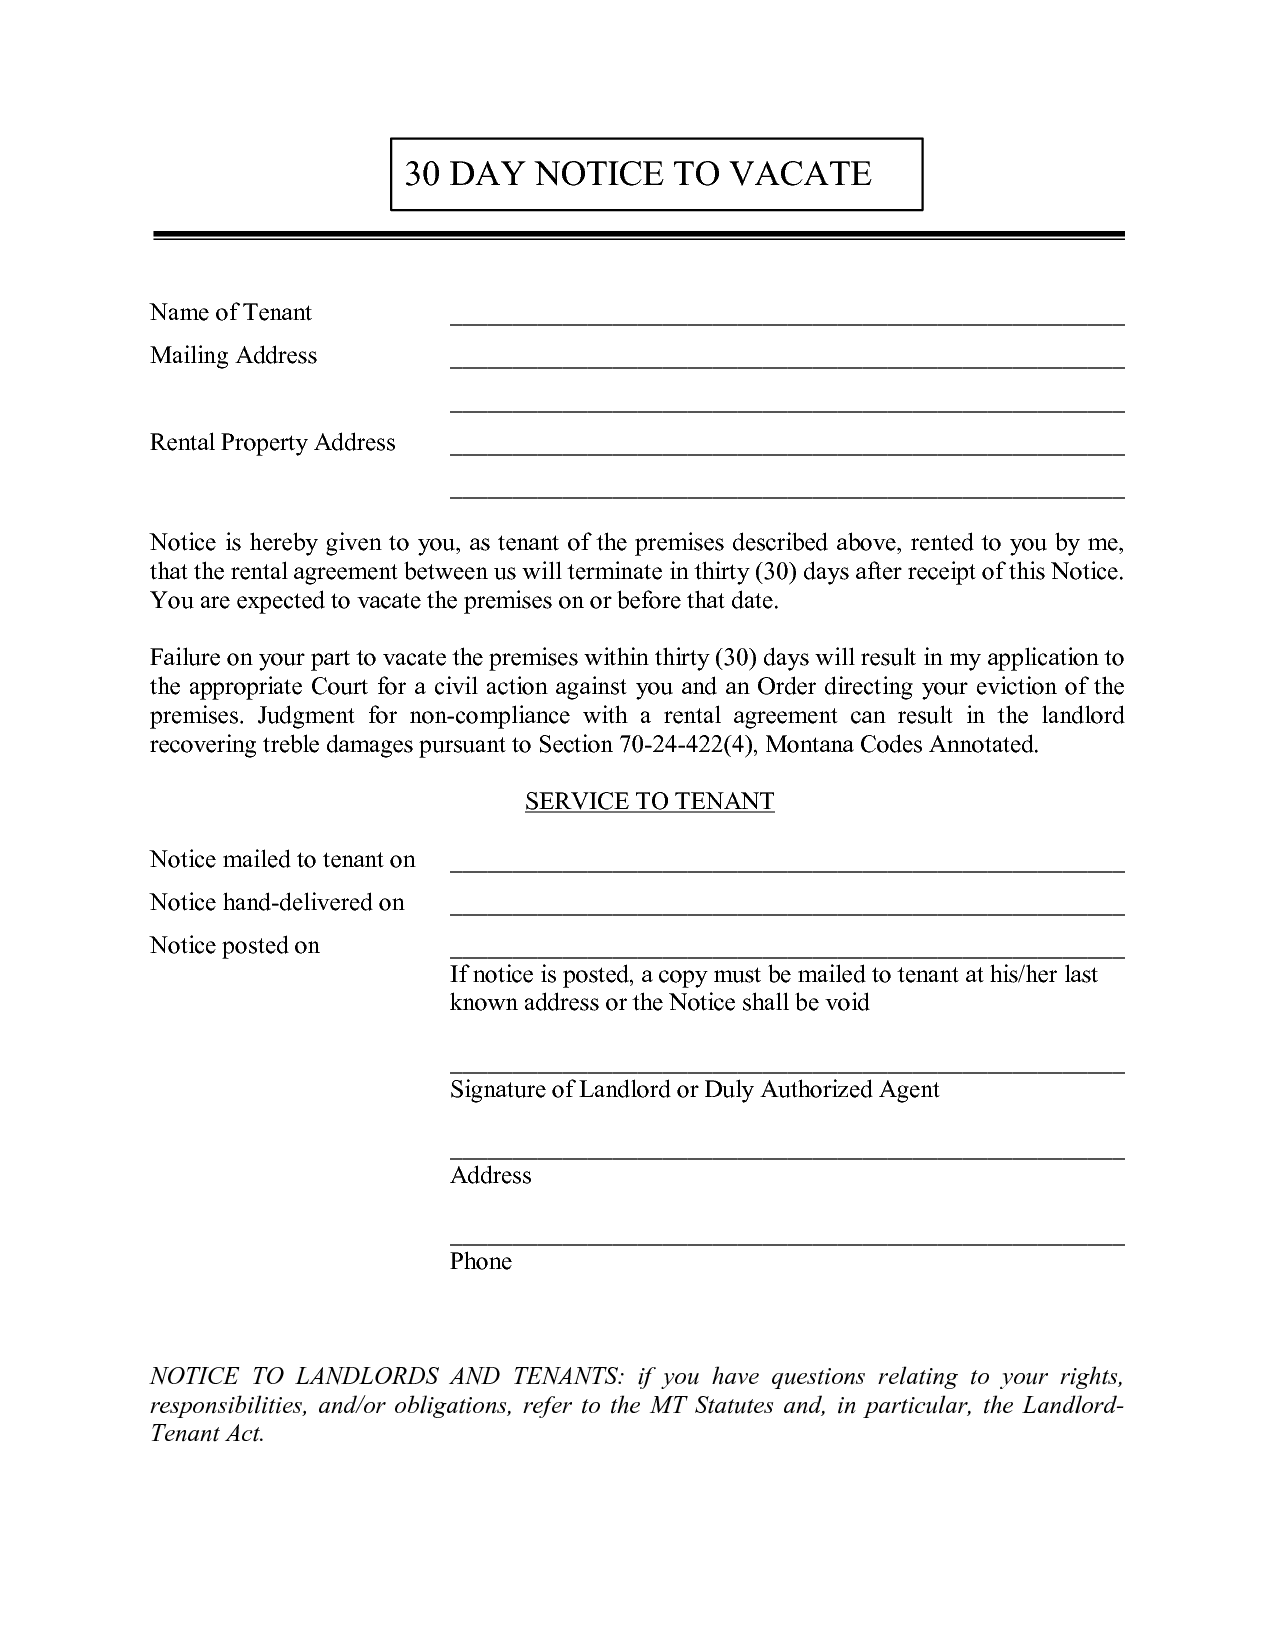 printable-notice-to-vacate